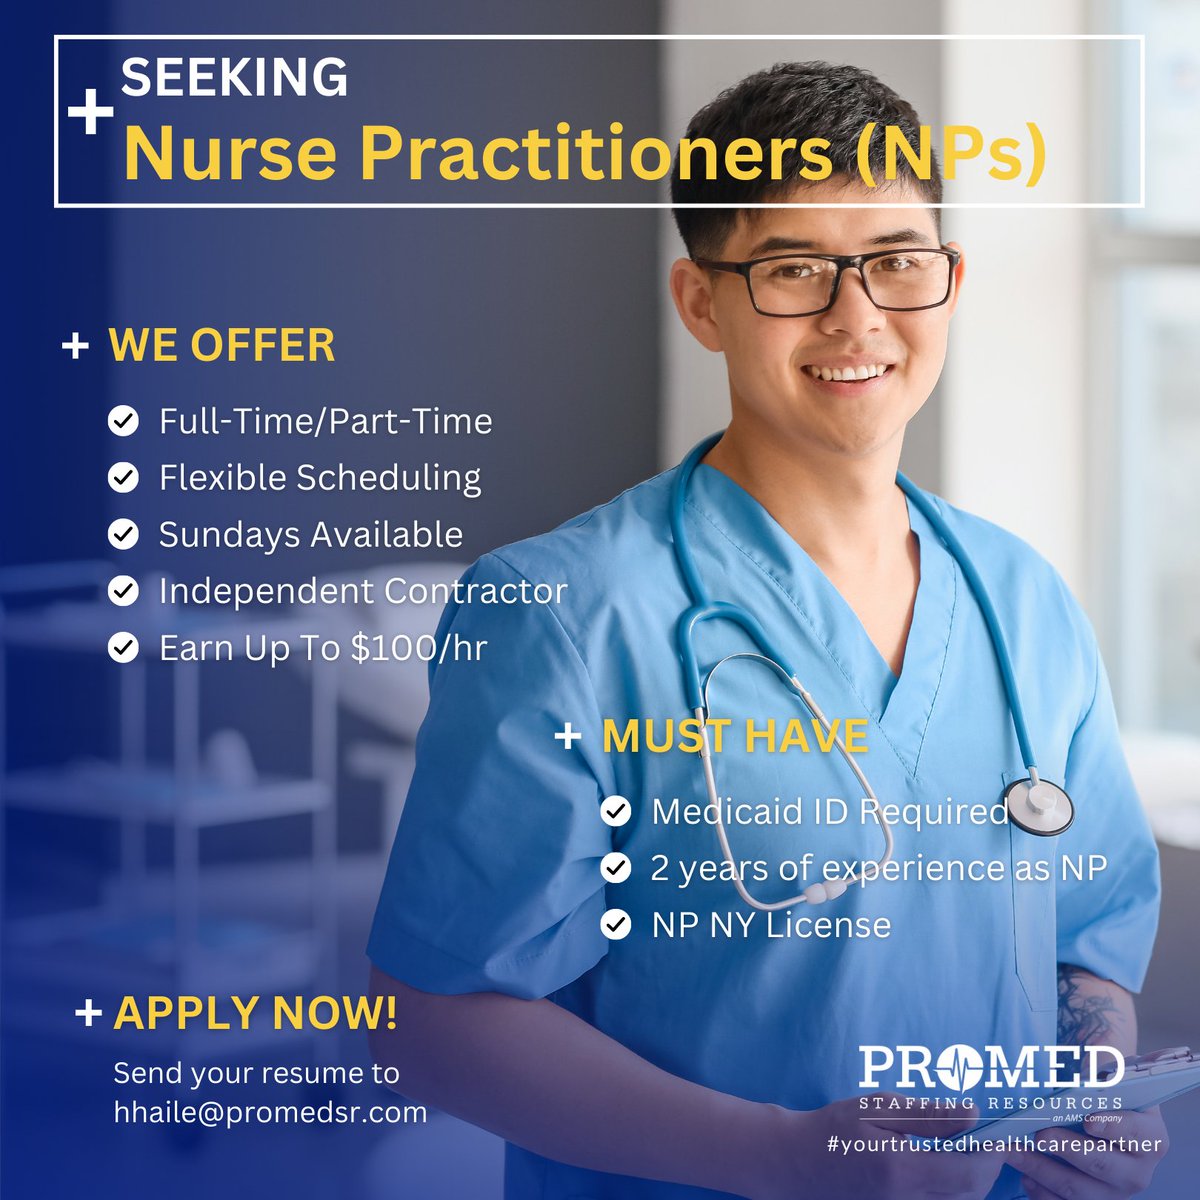 #nursepractitioners, are you looking for a #rewardingassignment? Apply now by emailing Hemeden Haile at hhaile@promedsr.com or call her at (212) 719-9600.
   
#maximus #promedsr #nursepractitionerjobs #nursepractitionersinyc #newyorknursepractitioners #practitionerorder